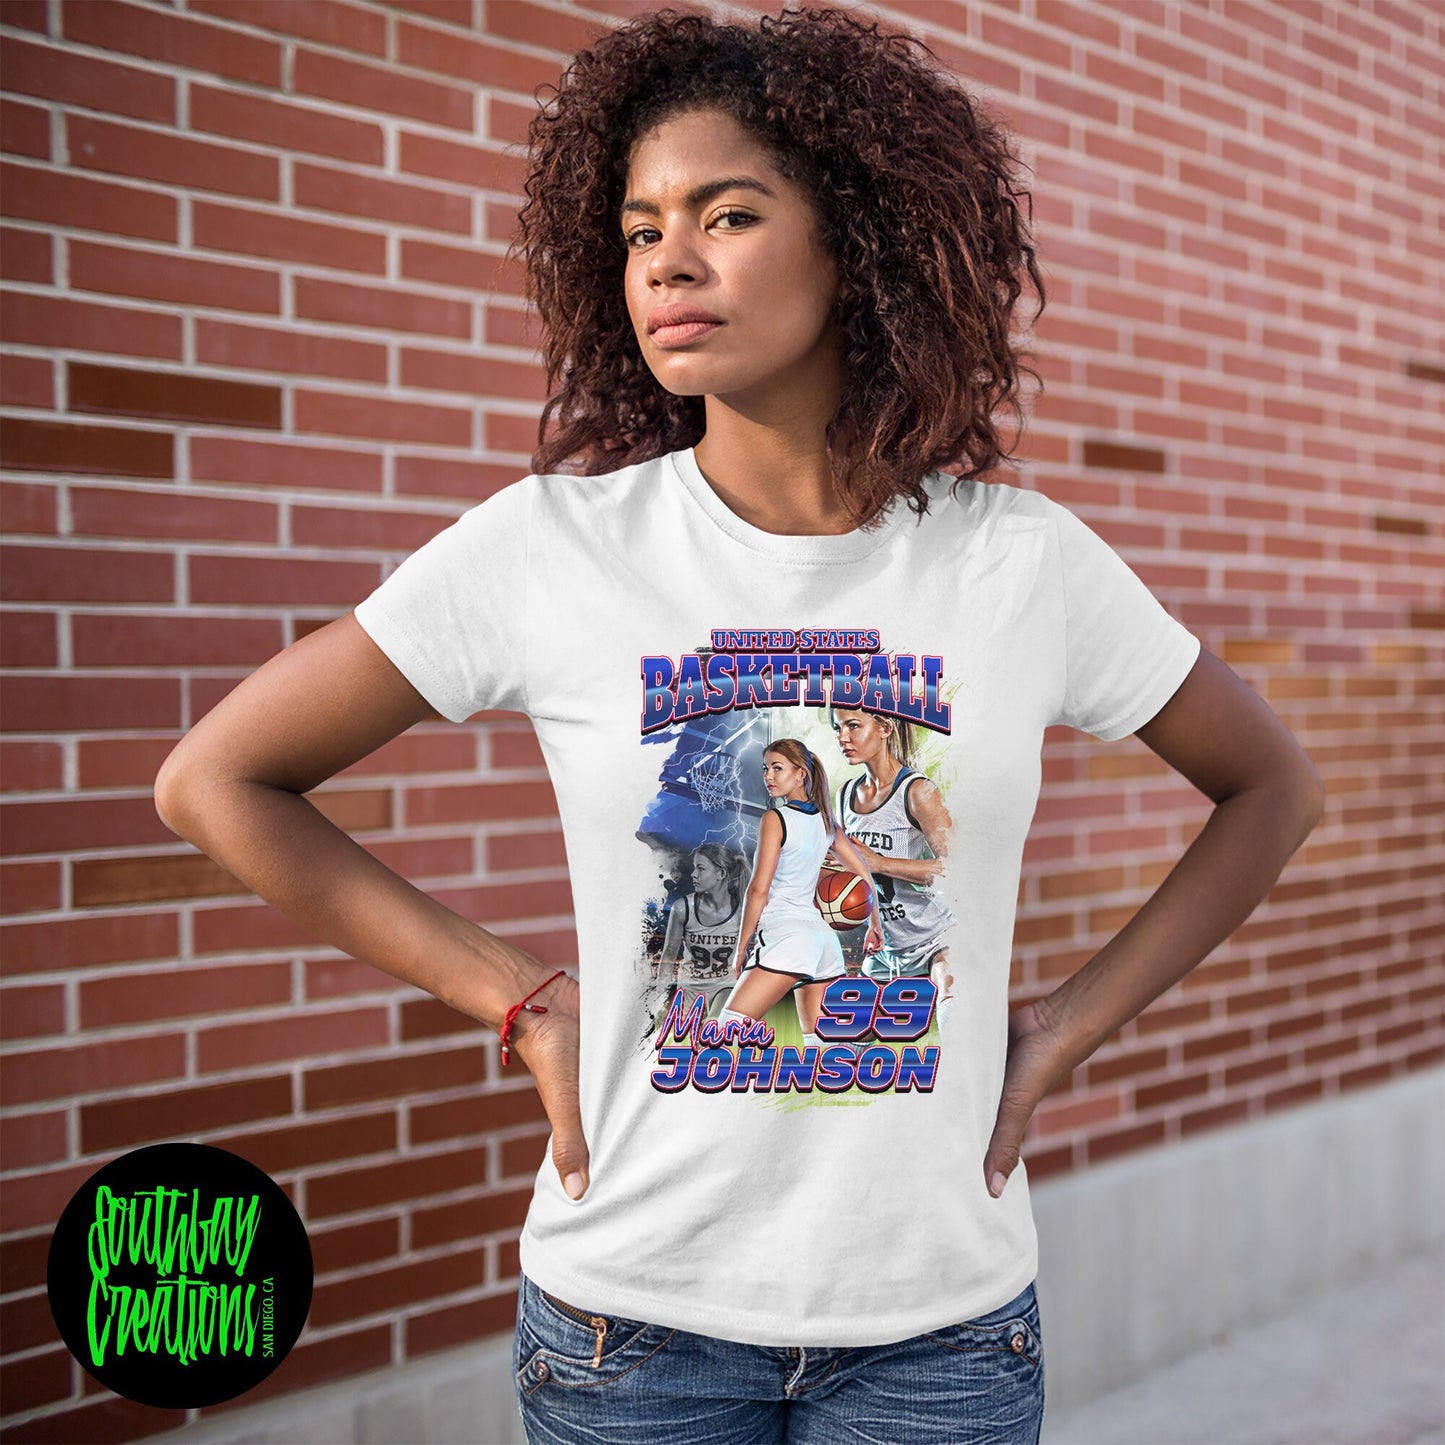 Personalized Womens Basketball Picture T-Shirt for Game Day Custom Photo Shirt Senior Gift, Basketball Mom, Dad, Sister, Aunt and Brother